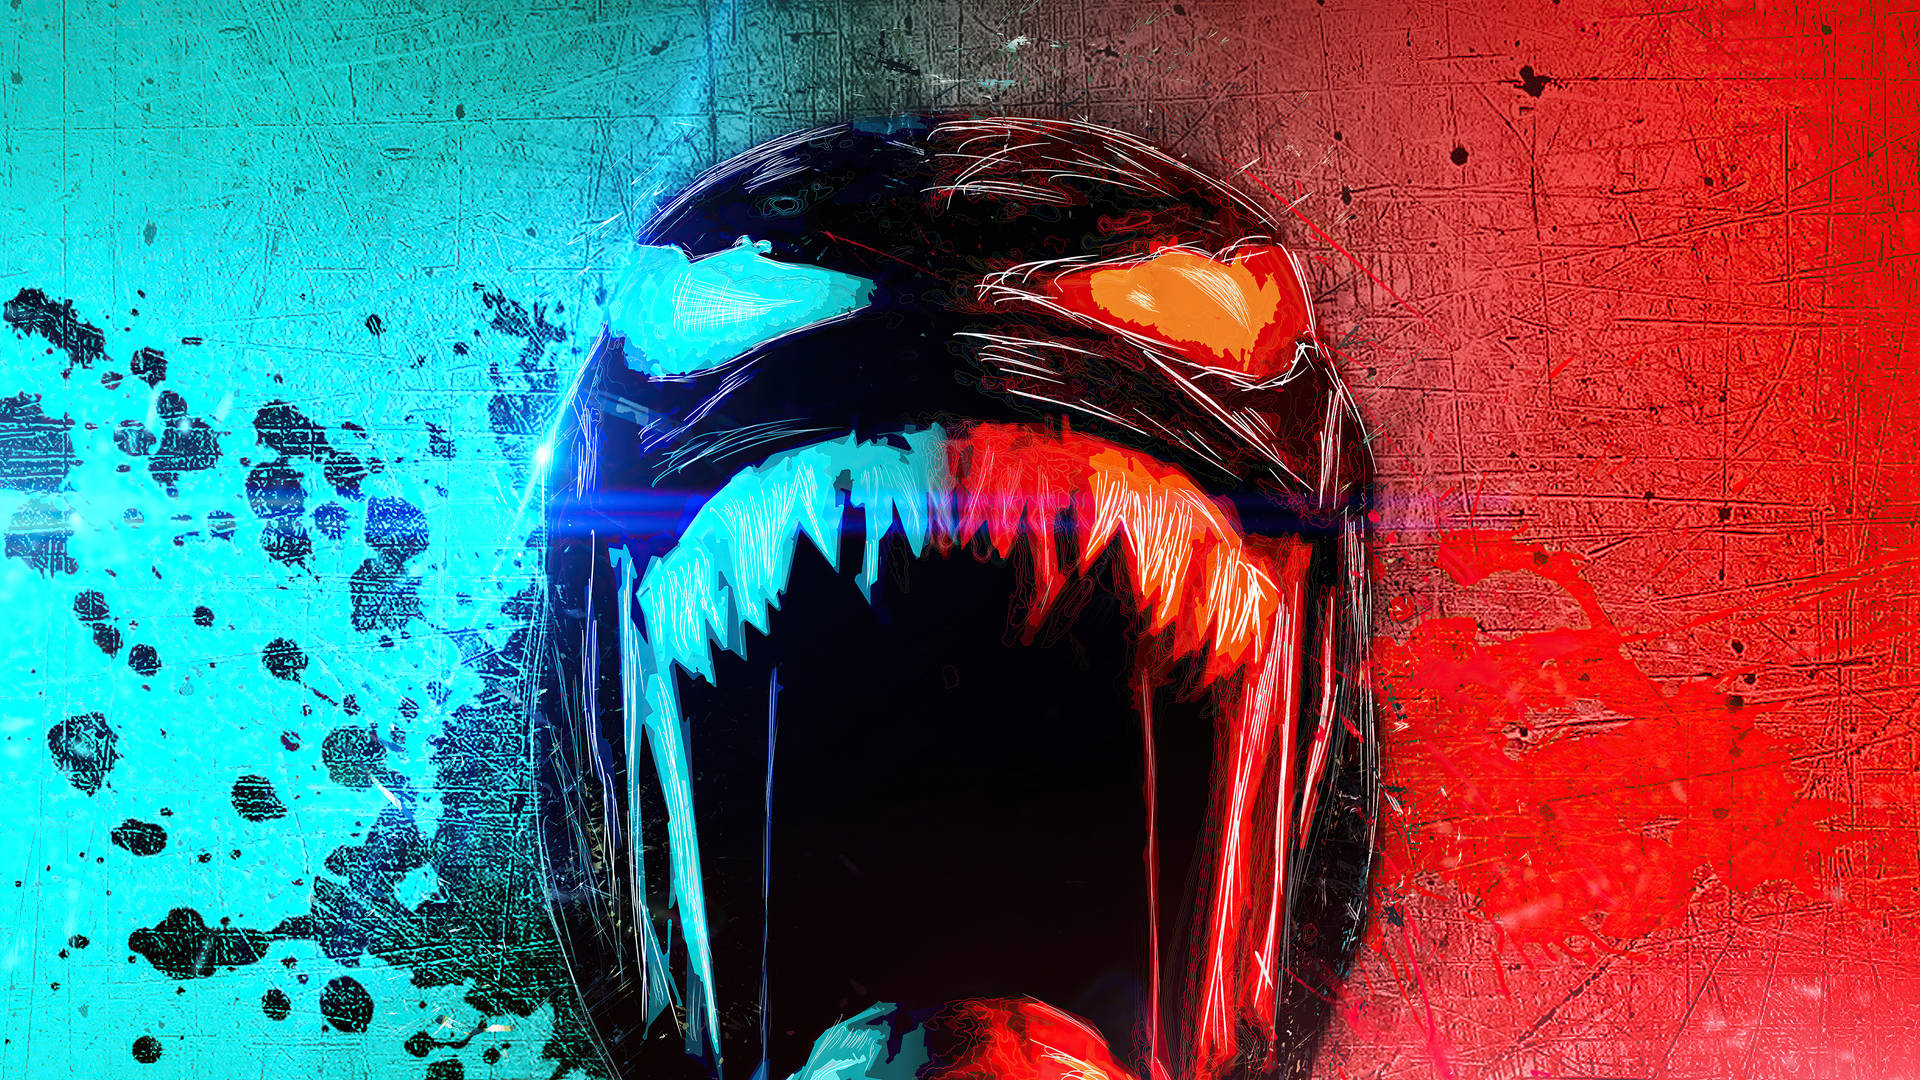 4K Venom Let There Be Carnage Logo Wallpapers